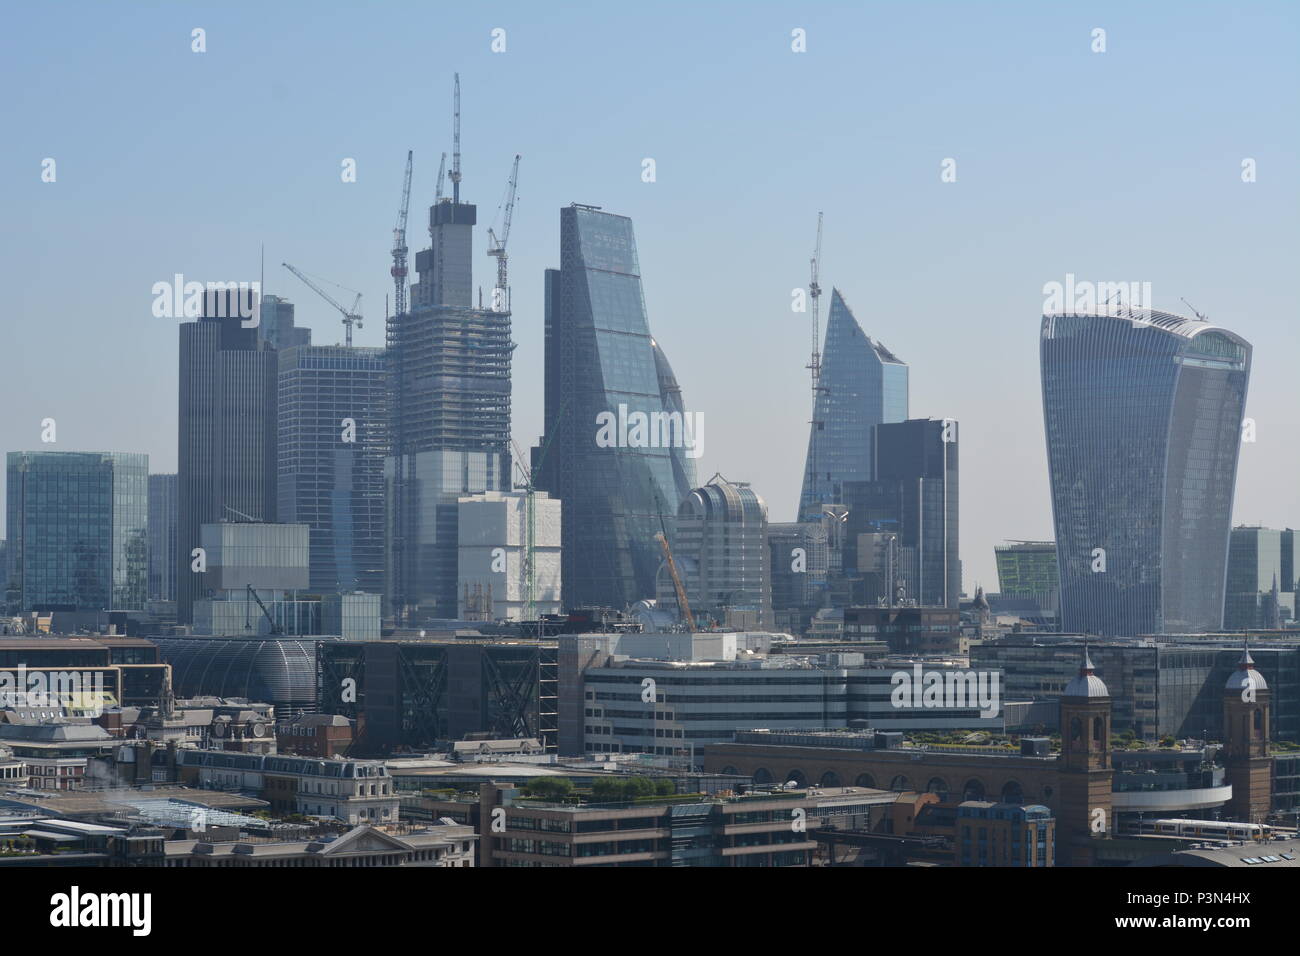 The London Skyline as seen from the rooftop of the Tate Modern museum ...